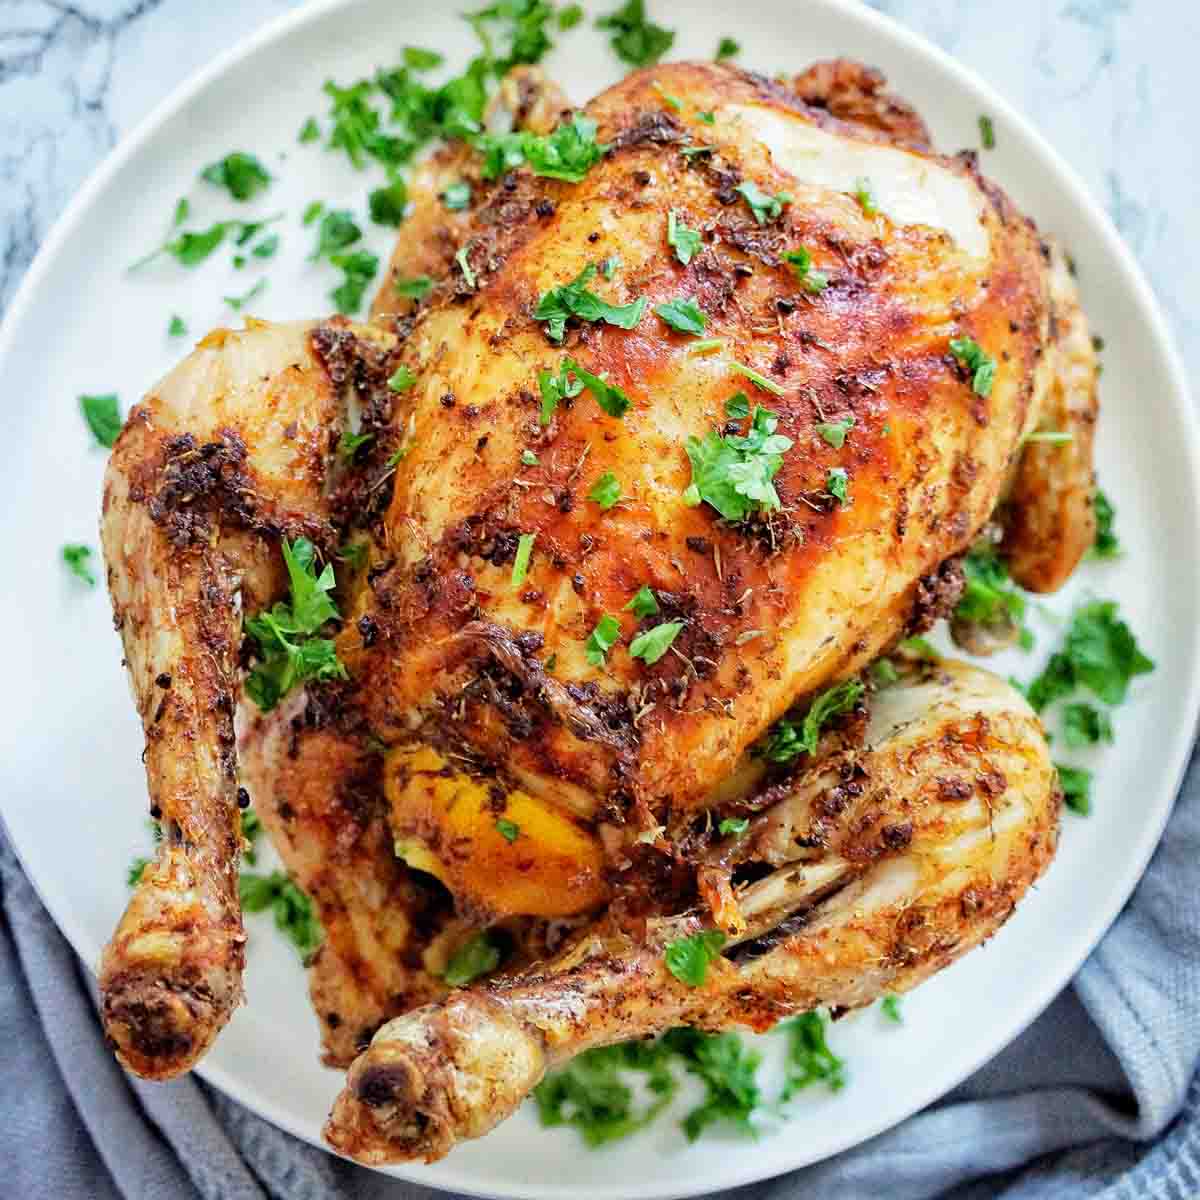 How Long Does A Roast Chicken Take To Cook In An Air Fryer - bmp-e